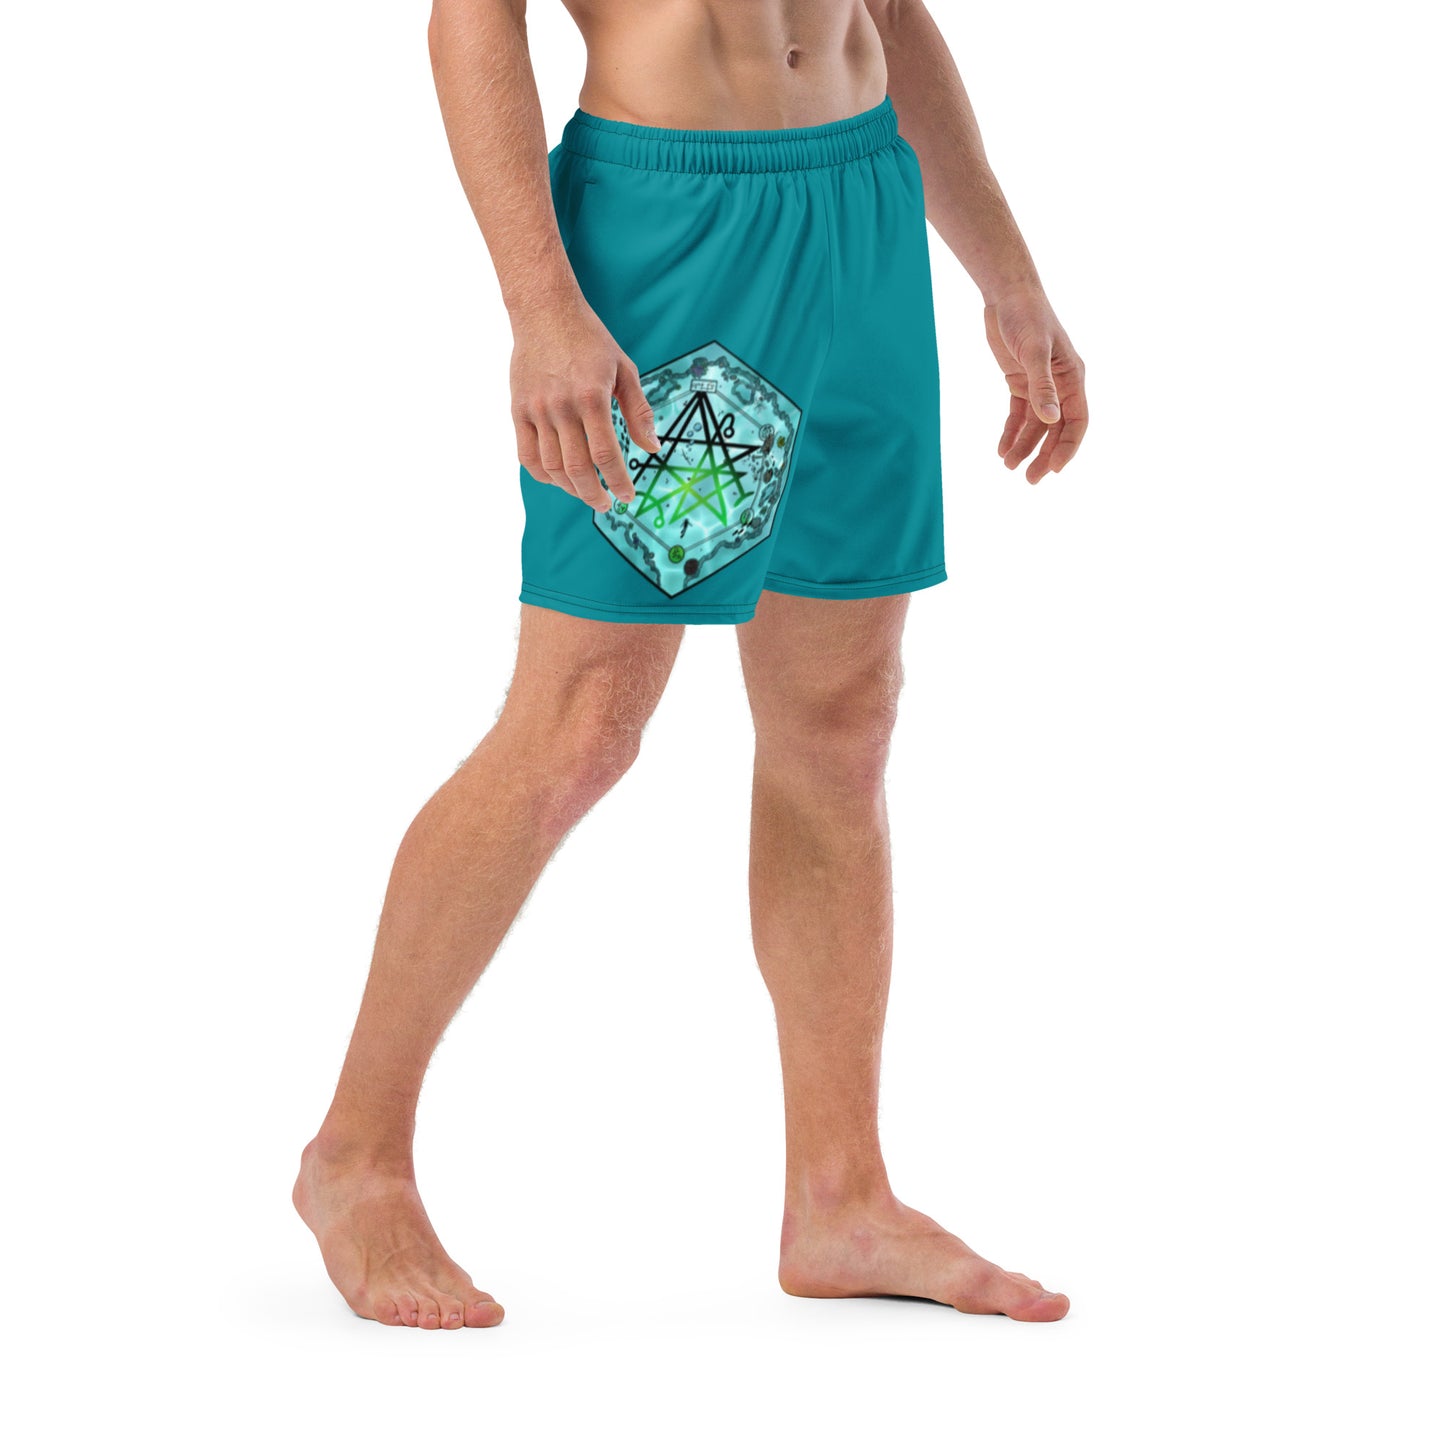 A model wears teal swim trunks with the Discovering the Gate hex map by Deven Rue.